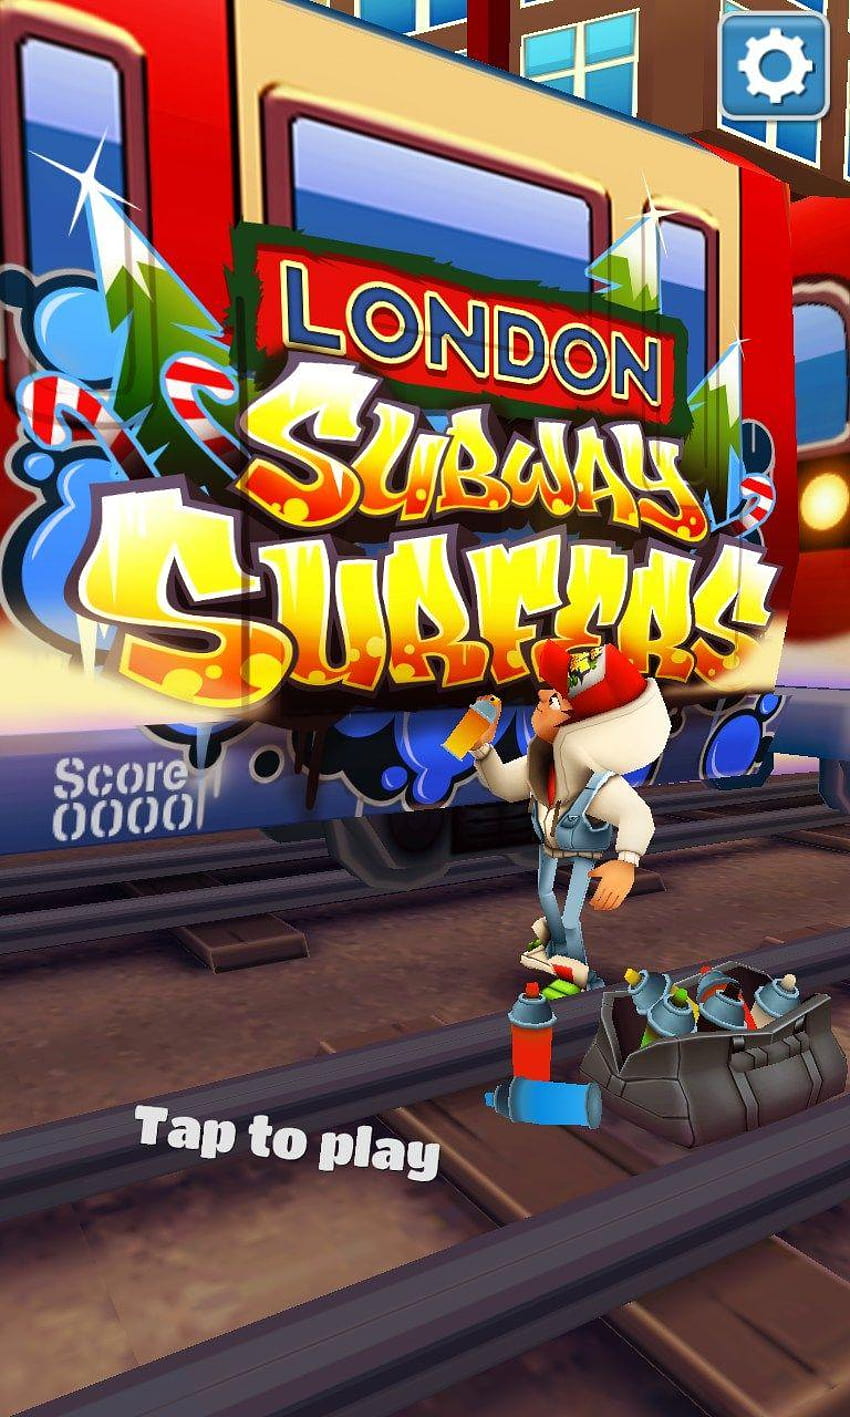 Subway Surfers for Nokia Lumia 510 – games for HD phone wallpaper